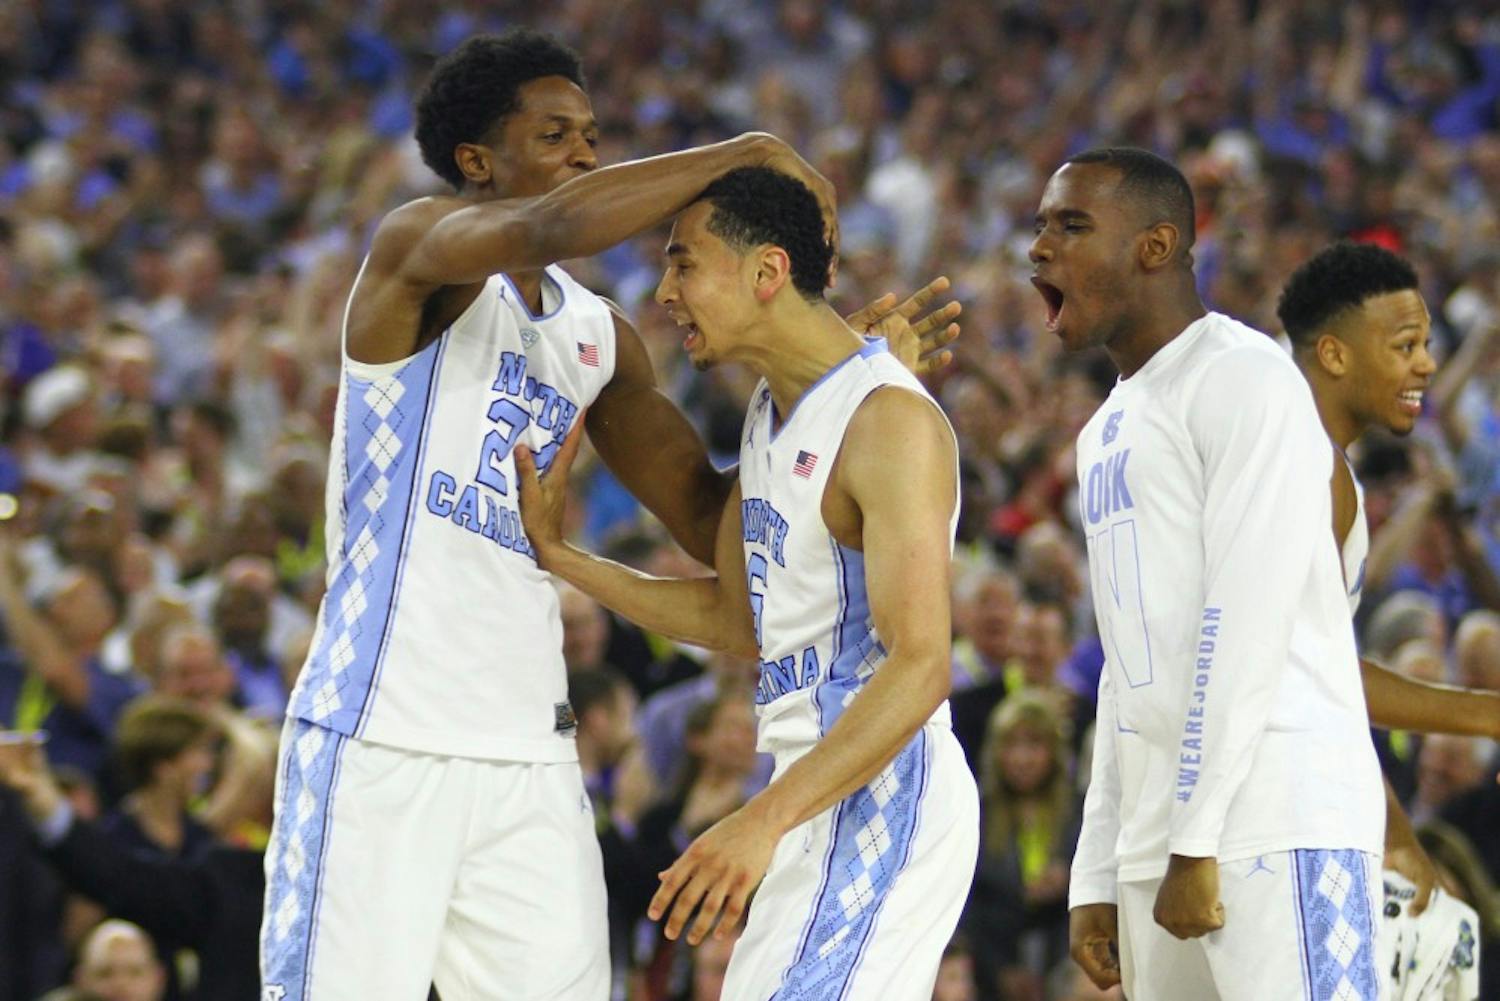 Kenny Williams (left) congratulates Marcus Paige after making a three-point shot in the last five seconds of the game.